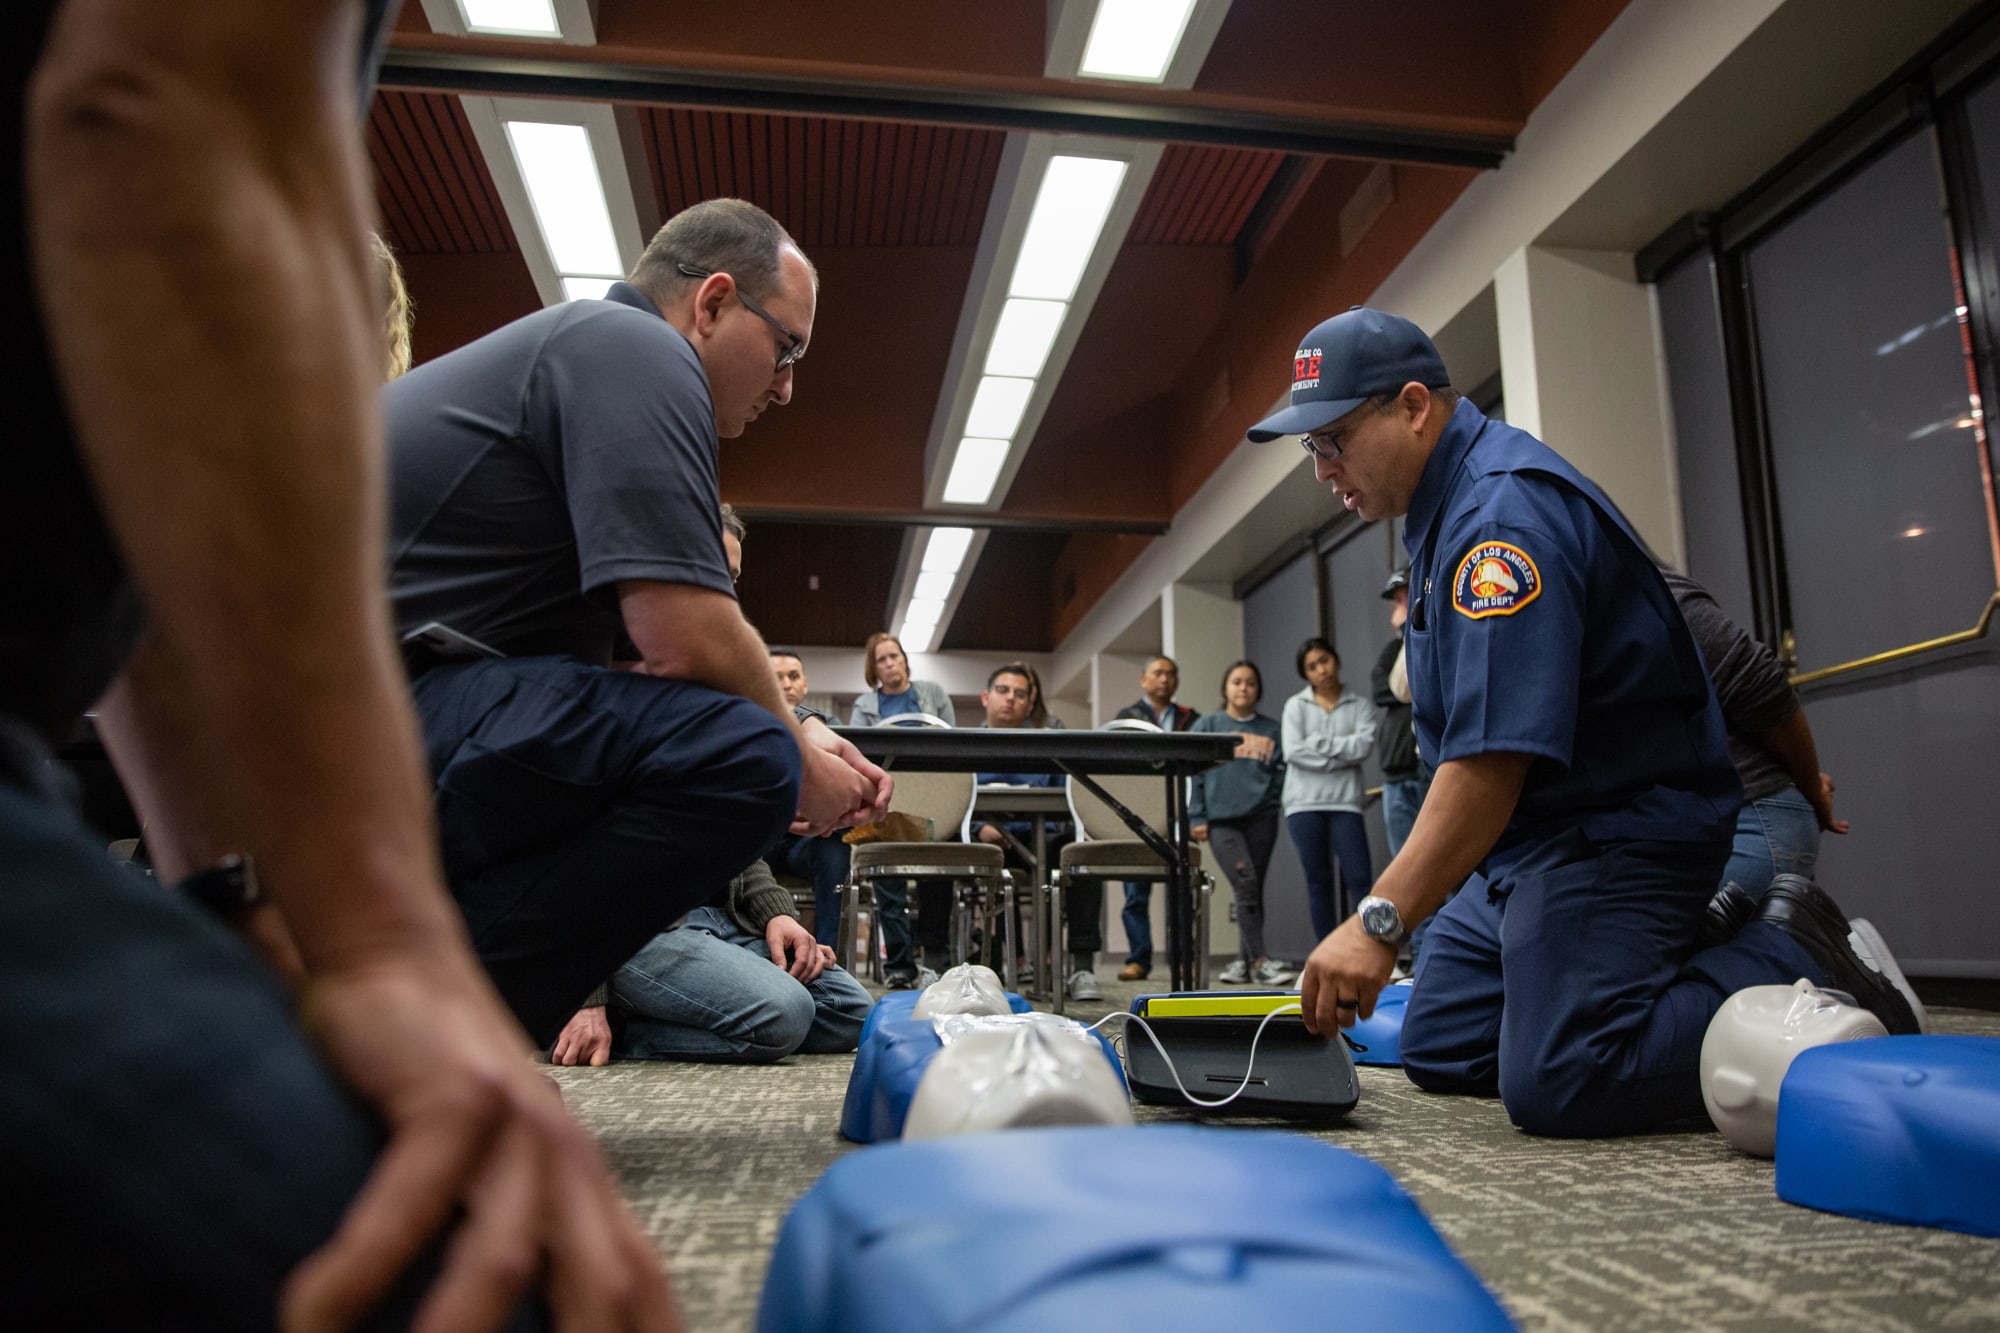 Luis Gonzalez, a Community Emergency Response Team instructor from the Los Angeles County Fire Department, showed trainees how to attach an automated external defibrillator during a CPR demonstration in Carson, California. (Brigette Waltermire/News21)